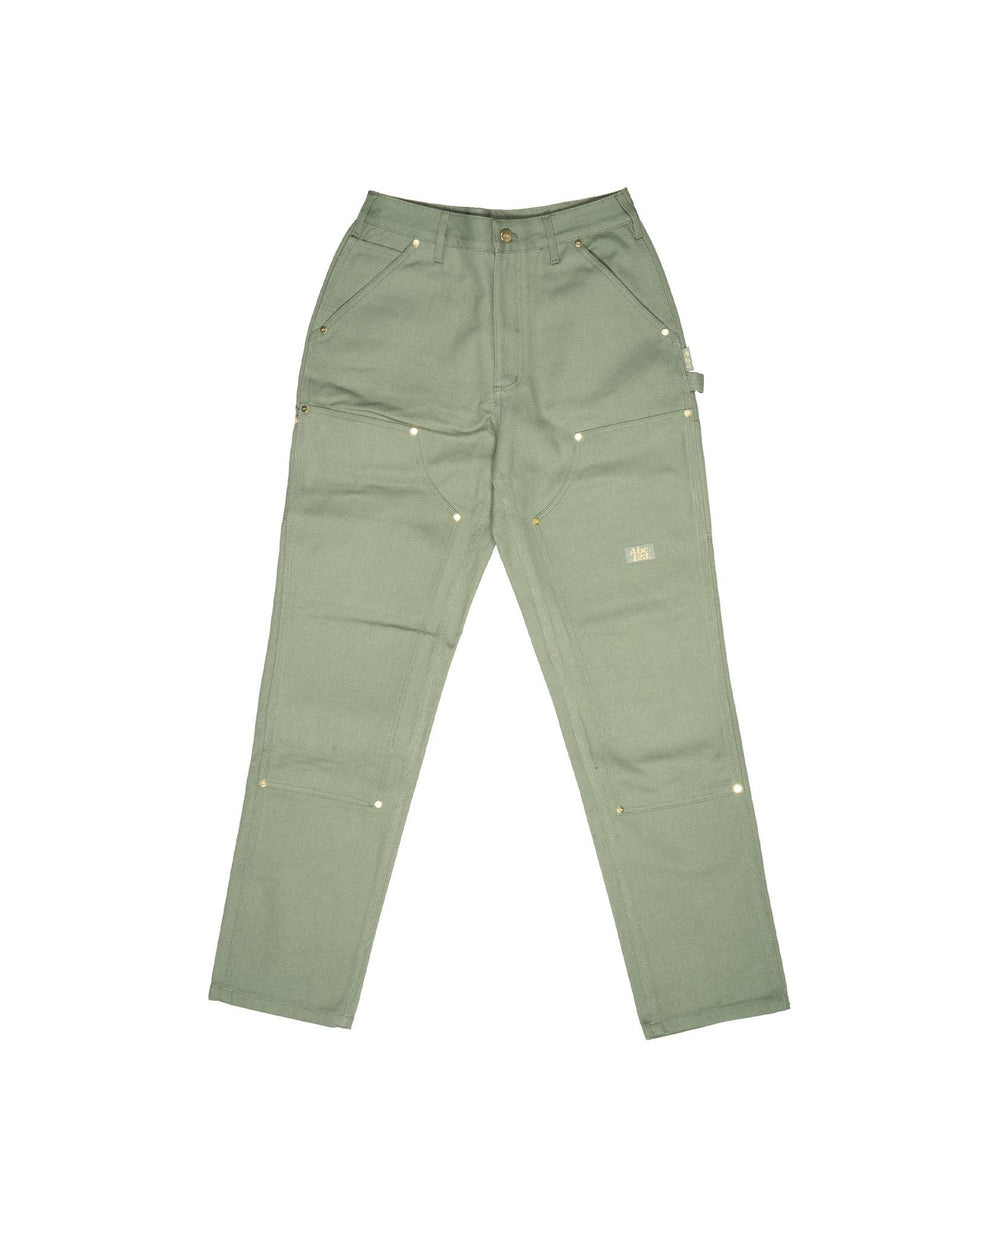 Advisory Board Crystals 123 Double Knee Pant | STASHED